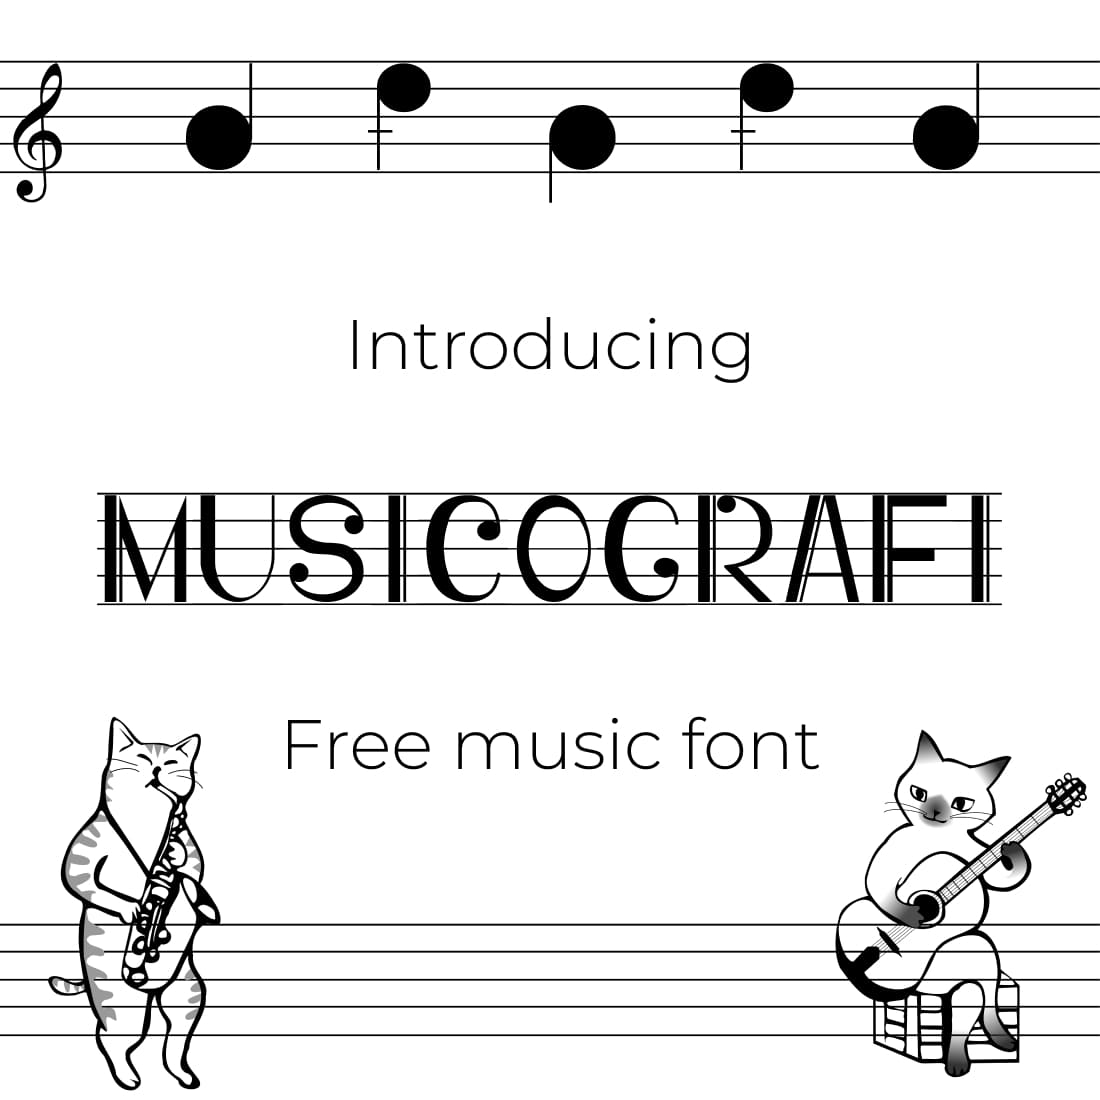 Cover image collage for Musicografi free music font by MasterBundles.